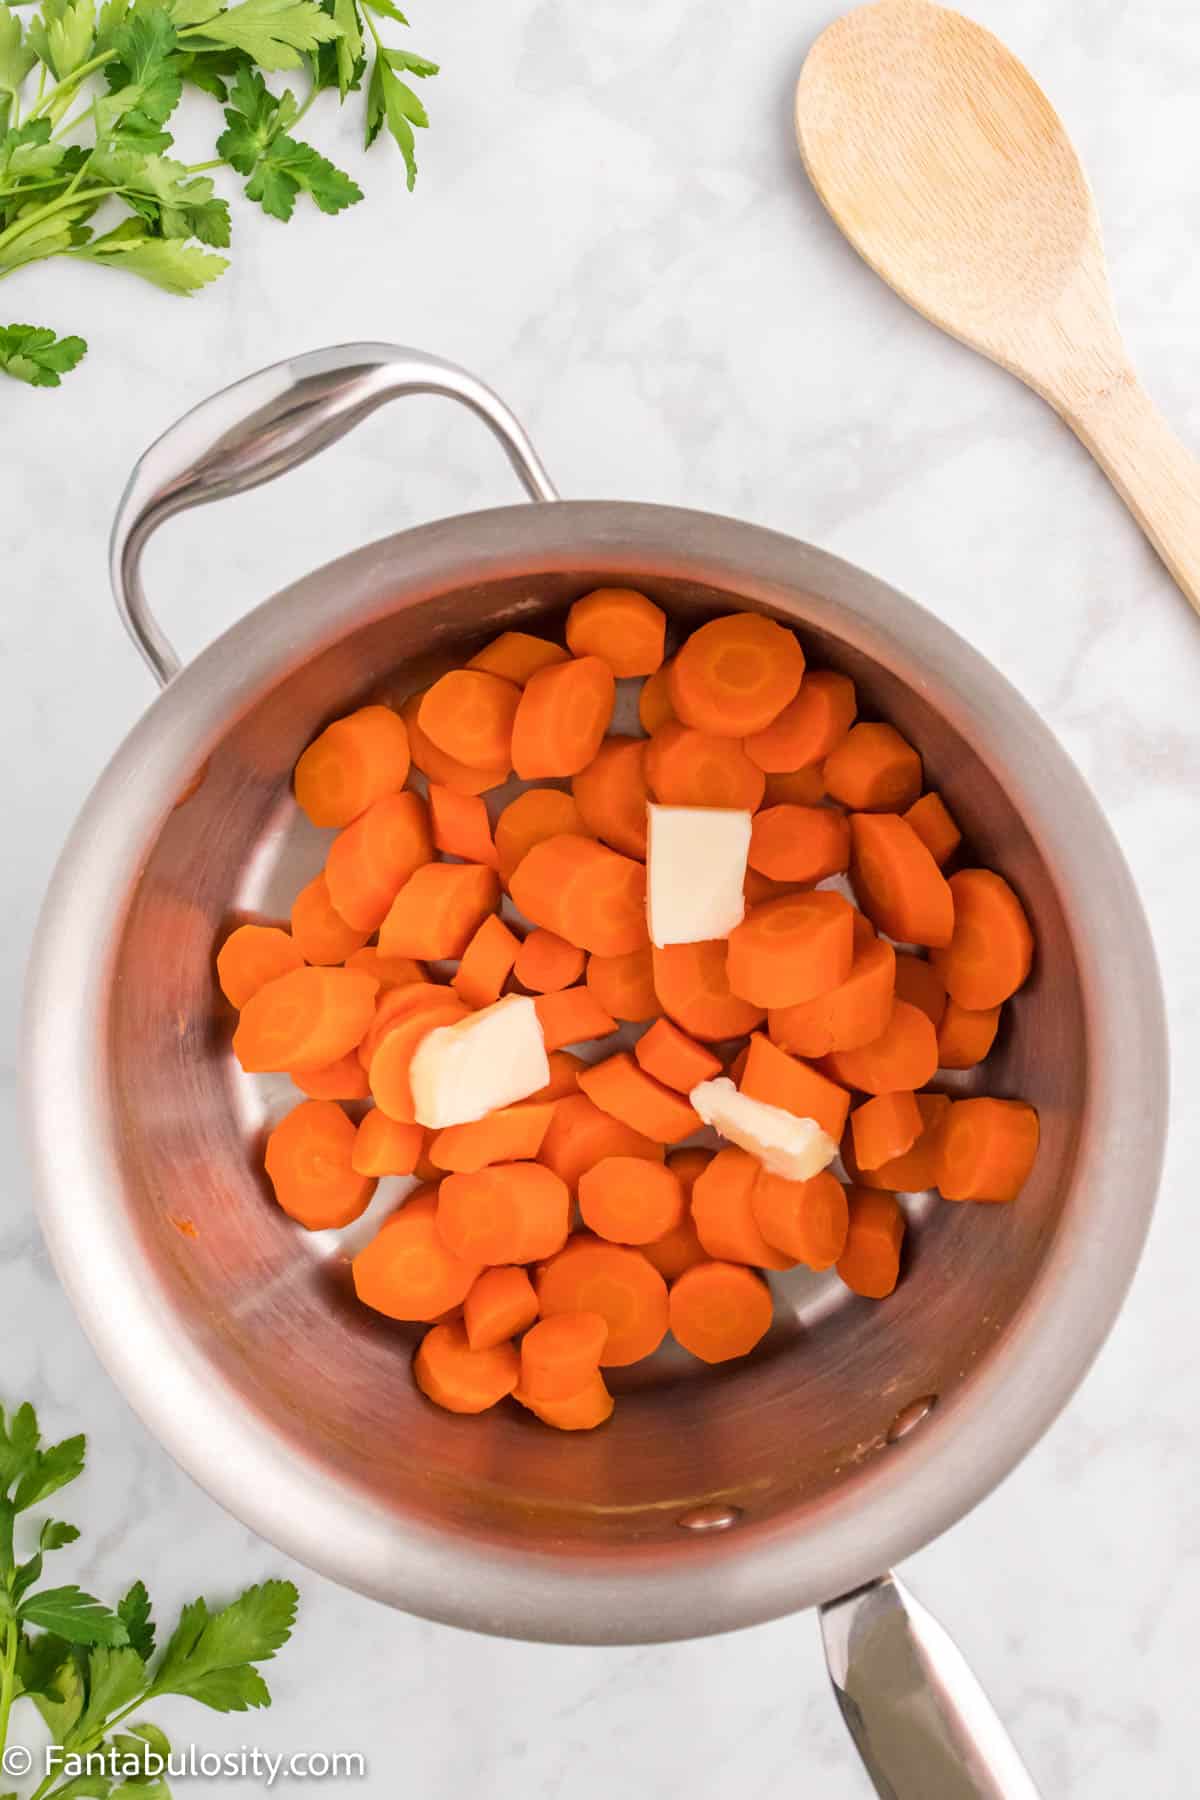 Cooked carrots and several pats of butter are shown in a medium sized saucepan ready to heat to make Candied Carrots